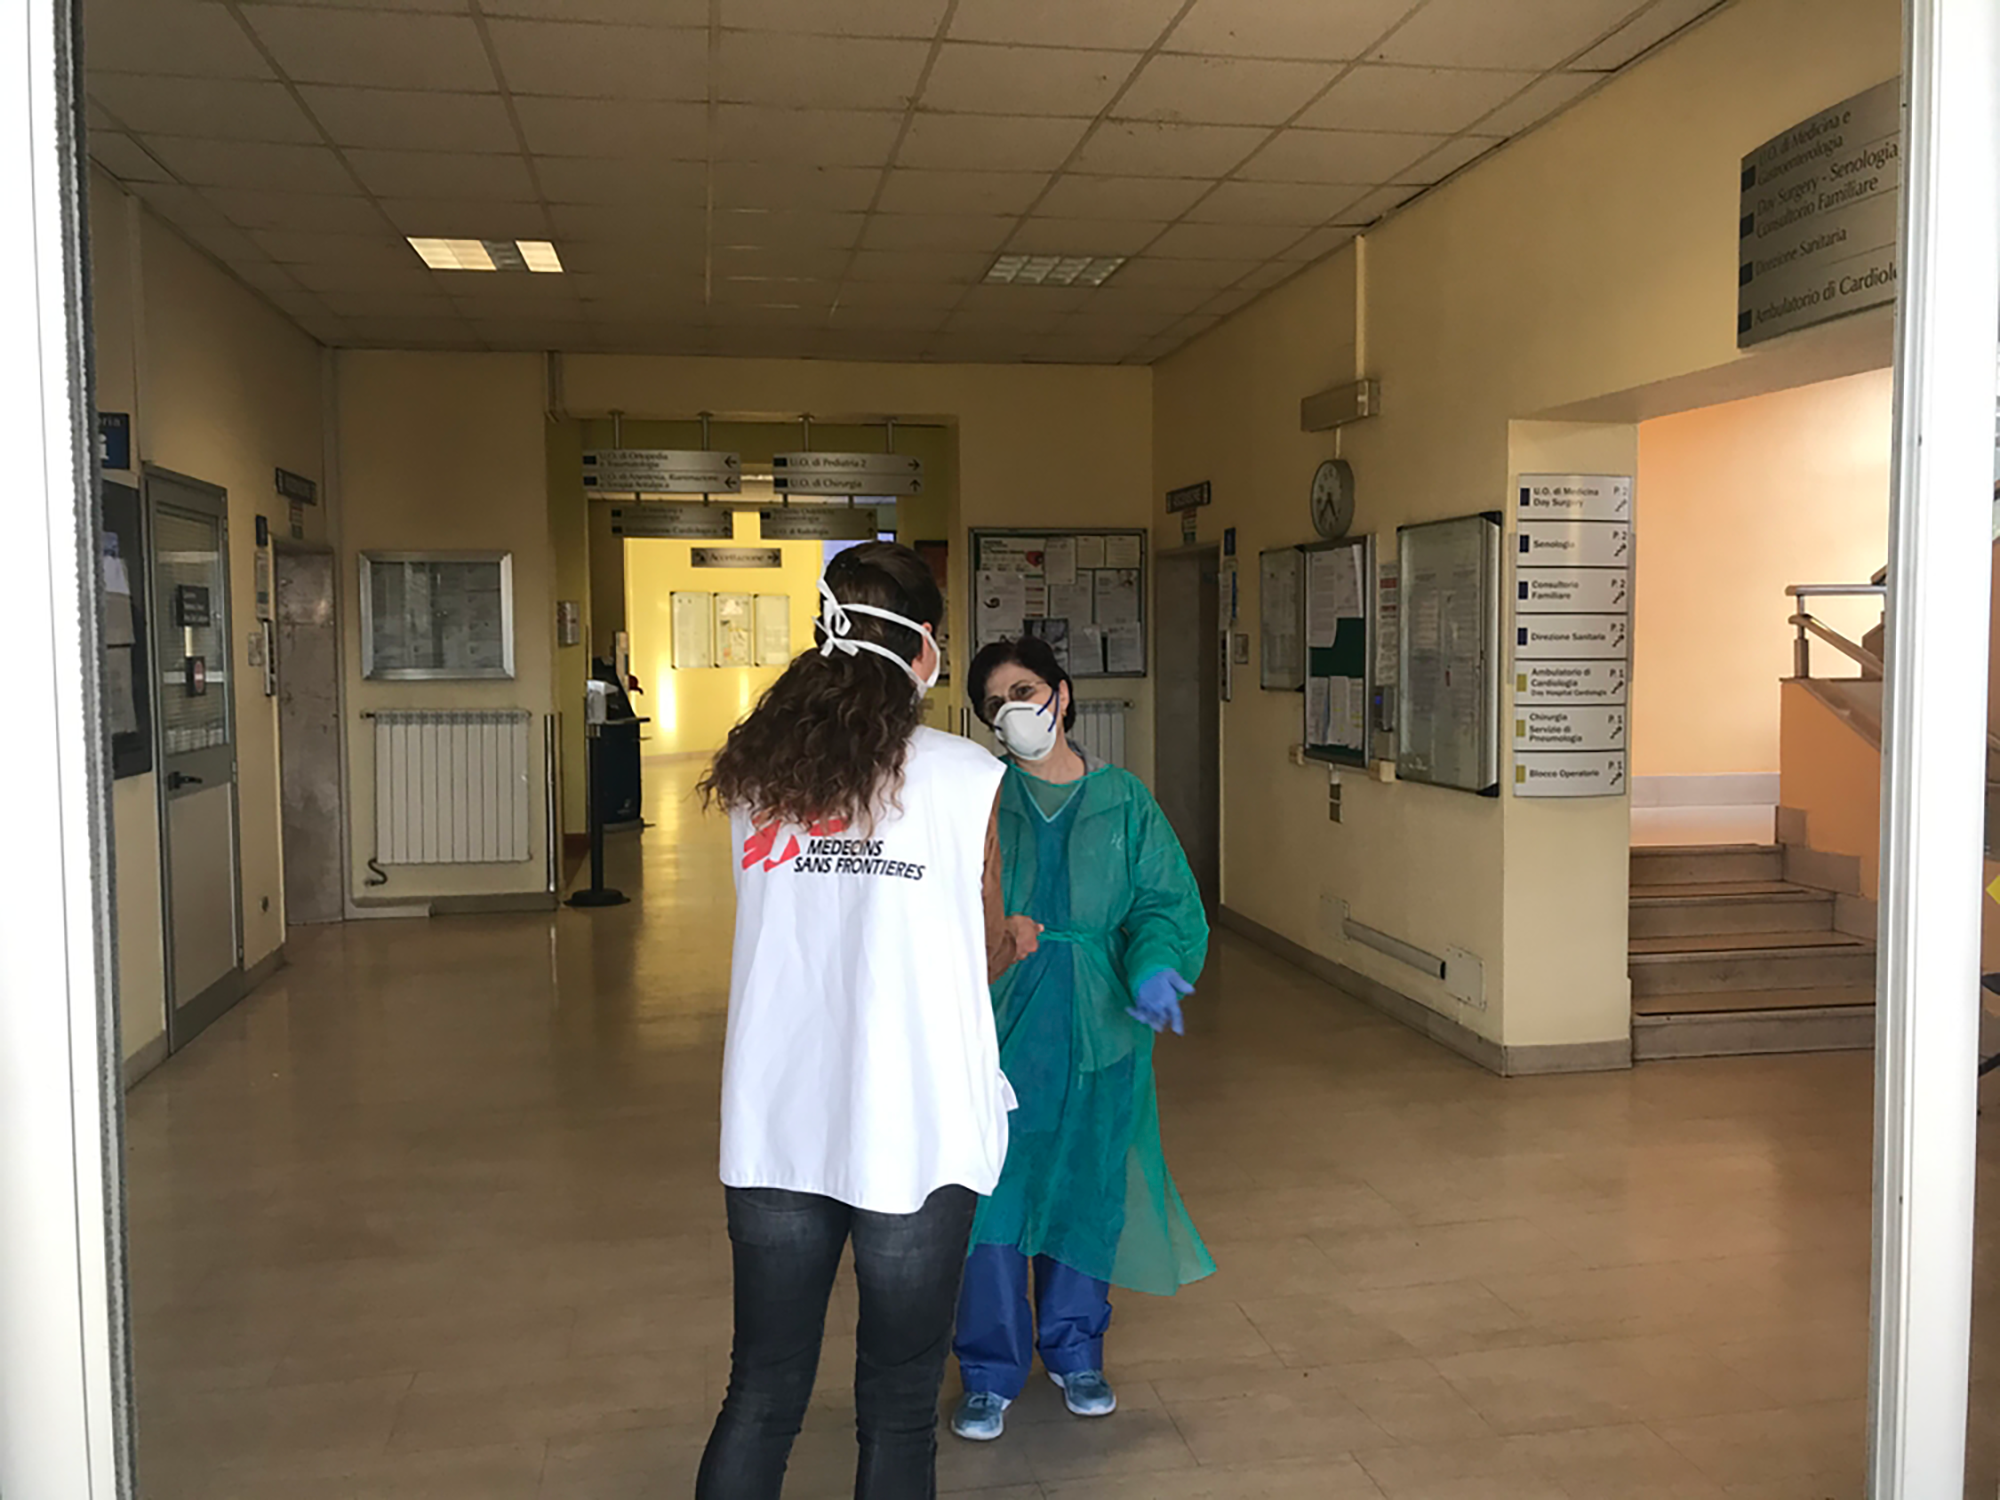 Carlotta, a nurse with MSF for 10 years, speaks with a hospital staff in Codogno hospital in Lombardia region, Italy. Her priority is to protect the hospital staff from contracting coronavirus COVID-19. © Lisa Veran/MSF